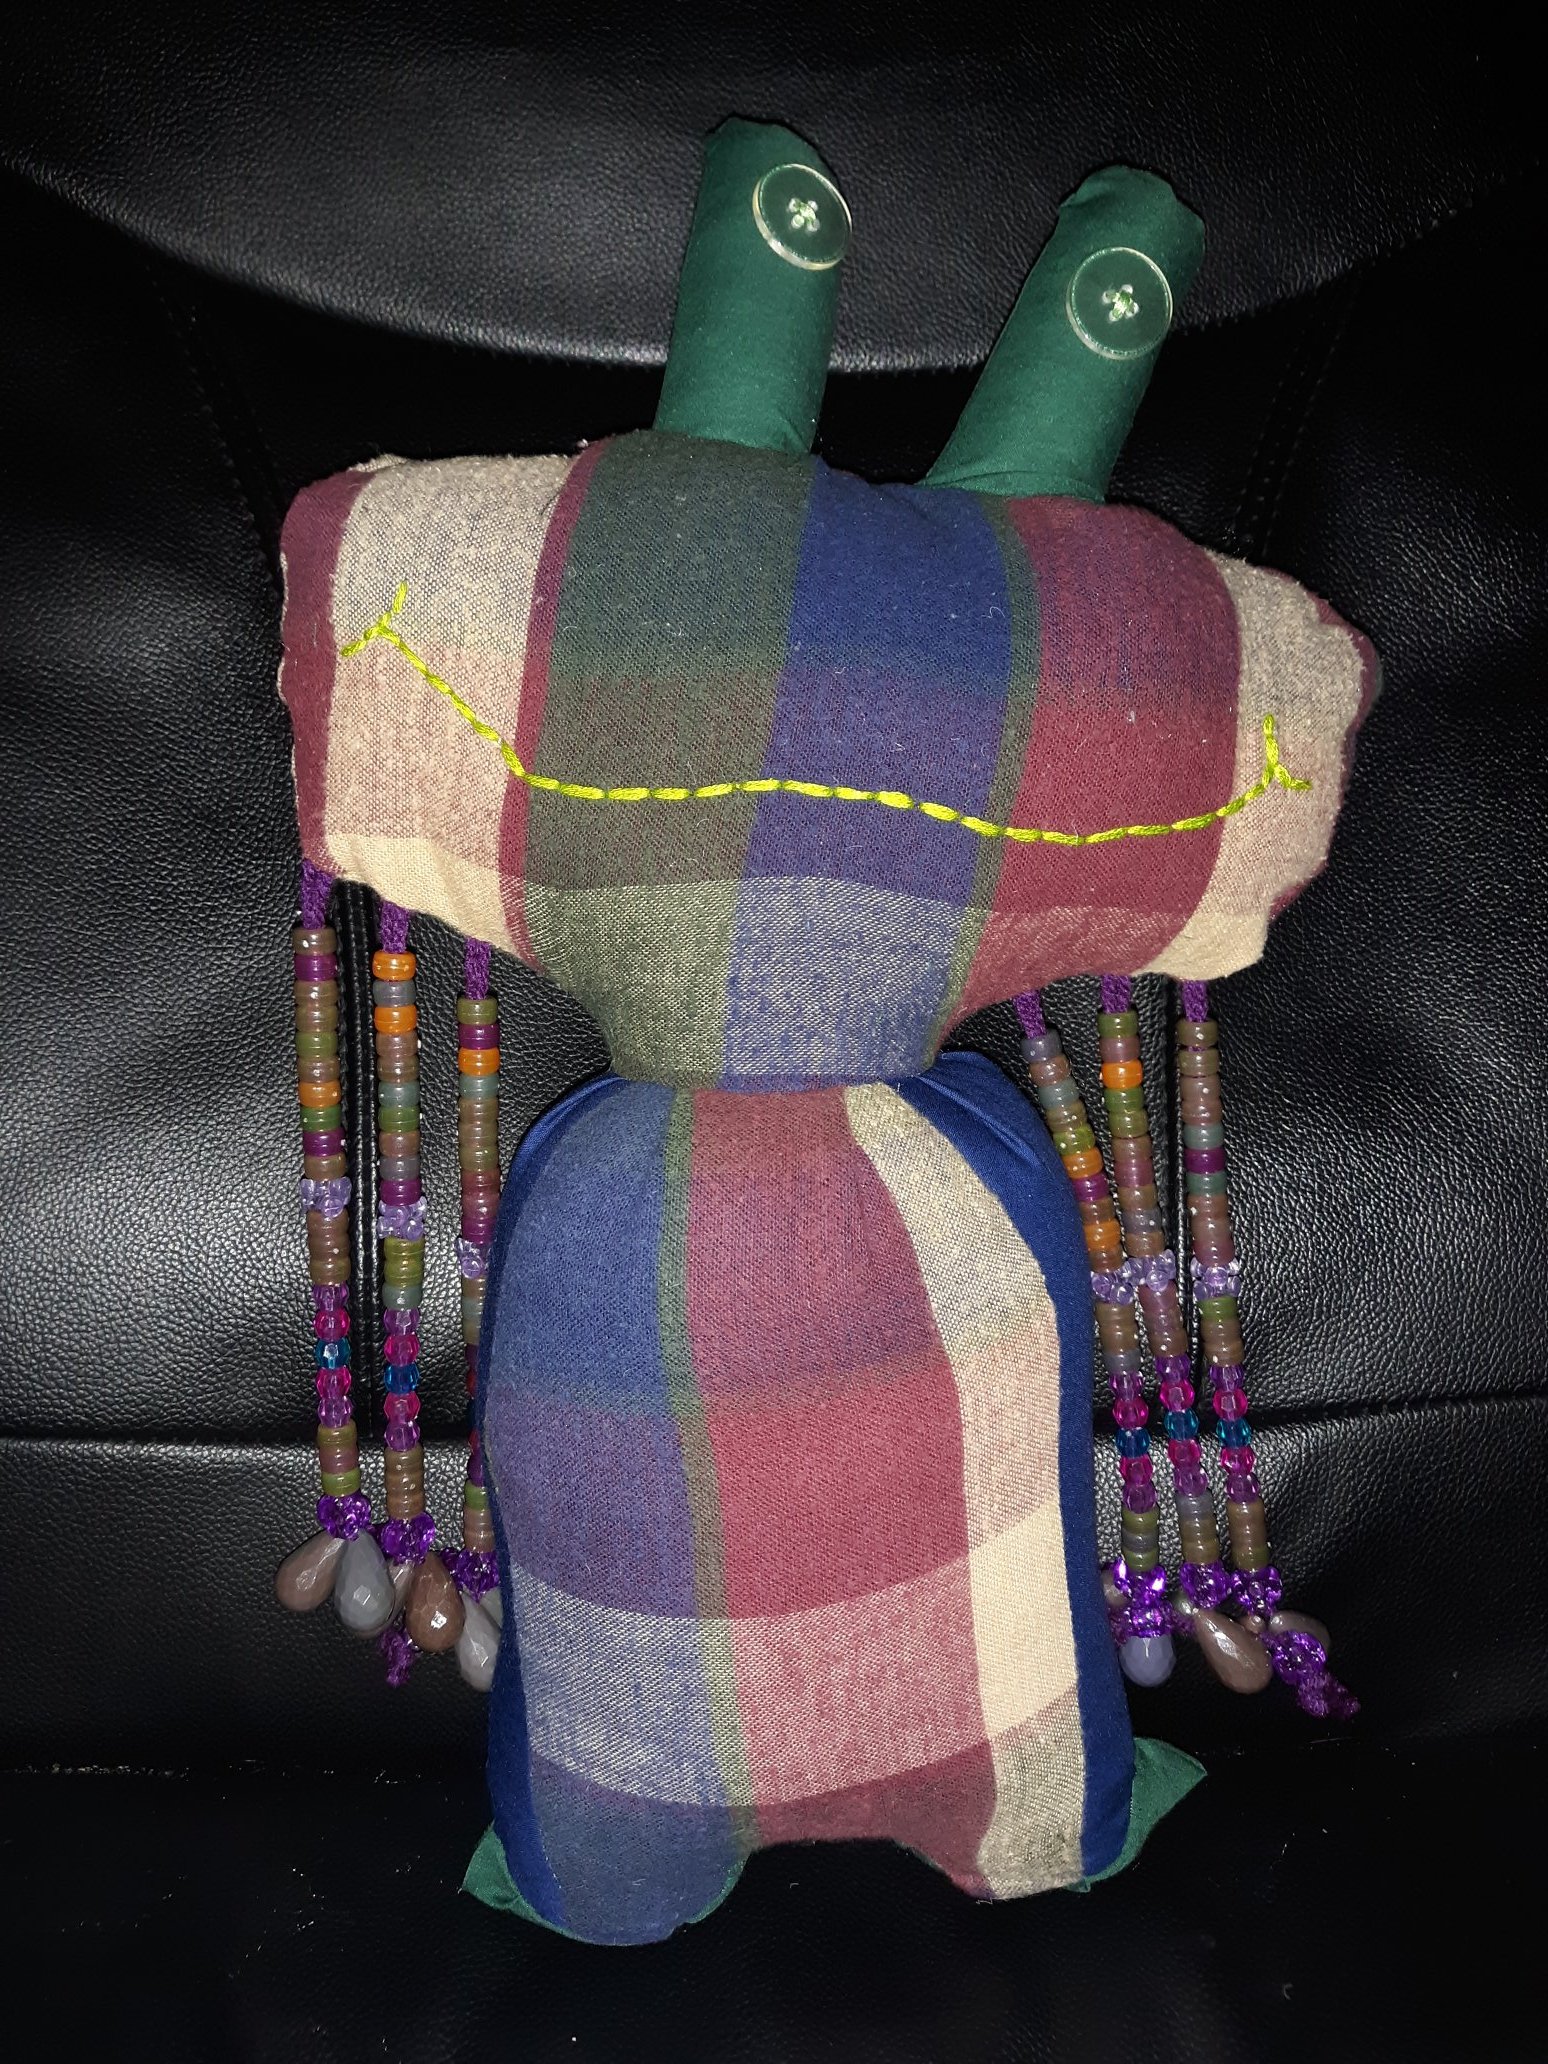 A doll that has a large, wide, plaid head with two little green cylindrical shaped growths coming out of the top. Each cylindrical shaped growth has a clear button eye sewn onto it. The head has a wide, highlighter green smile. There are three rows of beads hanging down from each side of the head. The body is also plaid with dark blue sides and the same green as the cylindrical growths on the bottom where the stubby feet are.